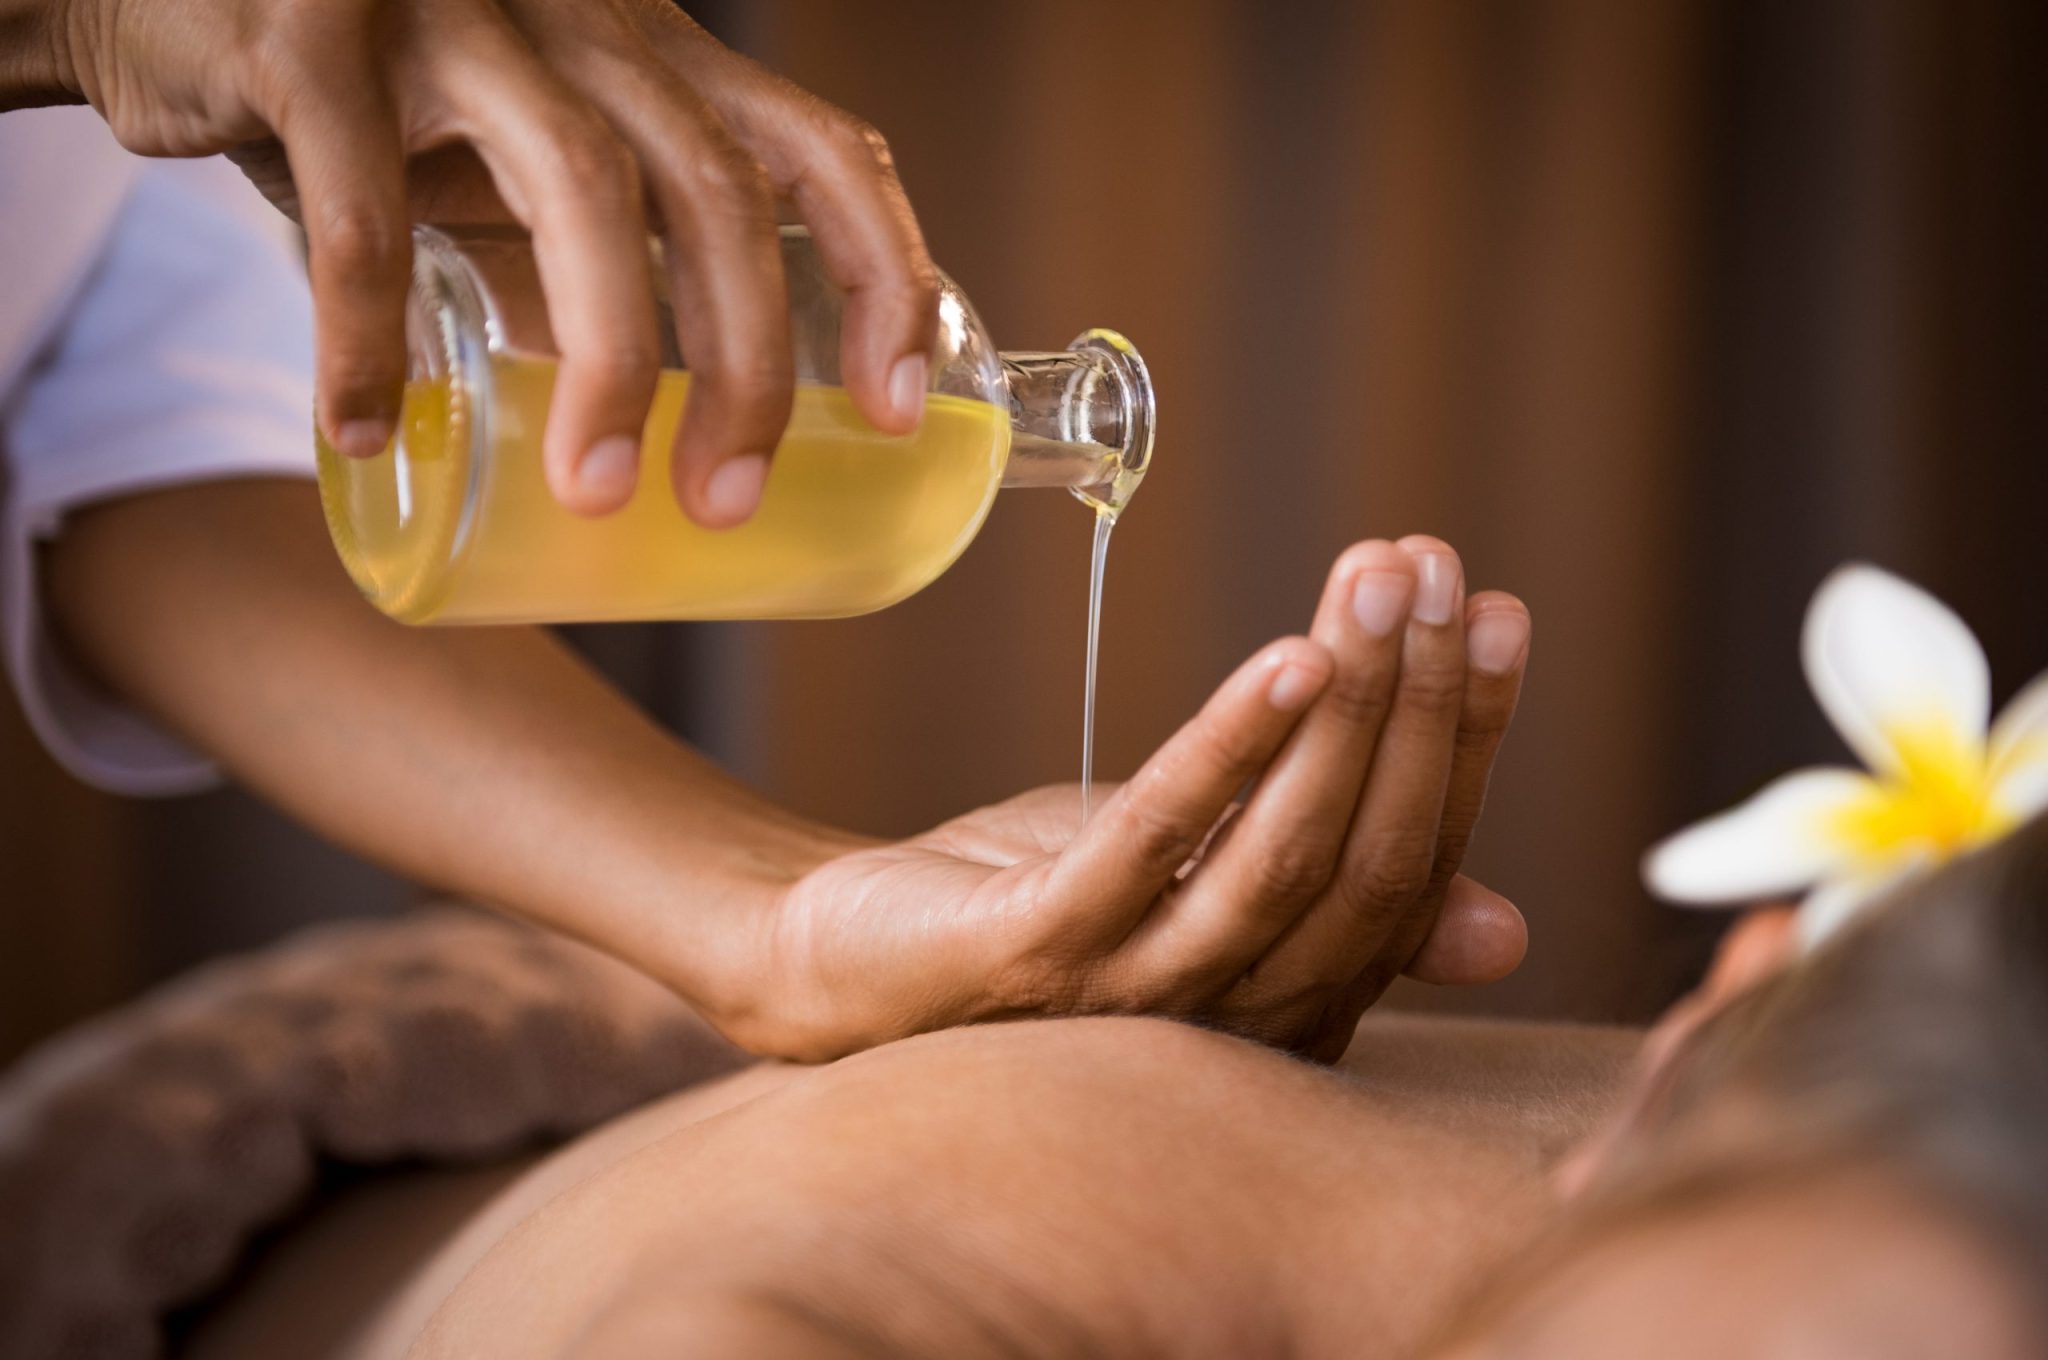 Aromas used for massages at Let's Relax spa in Phuket - Let's Relax Spa